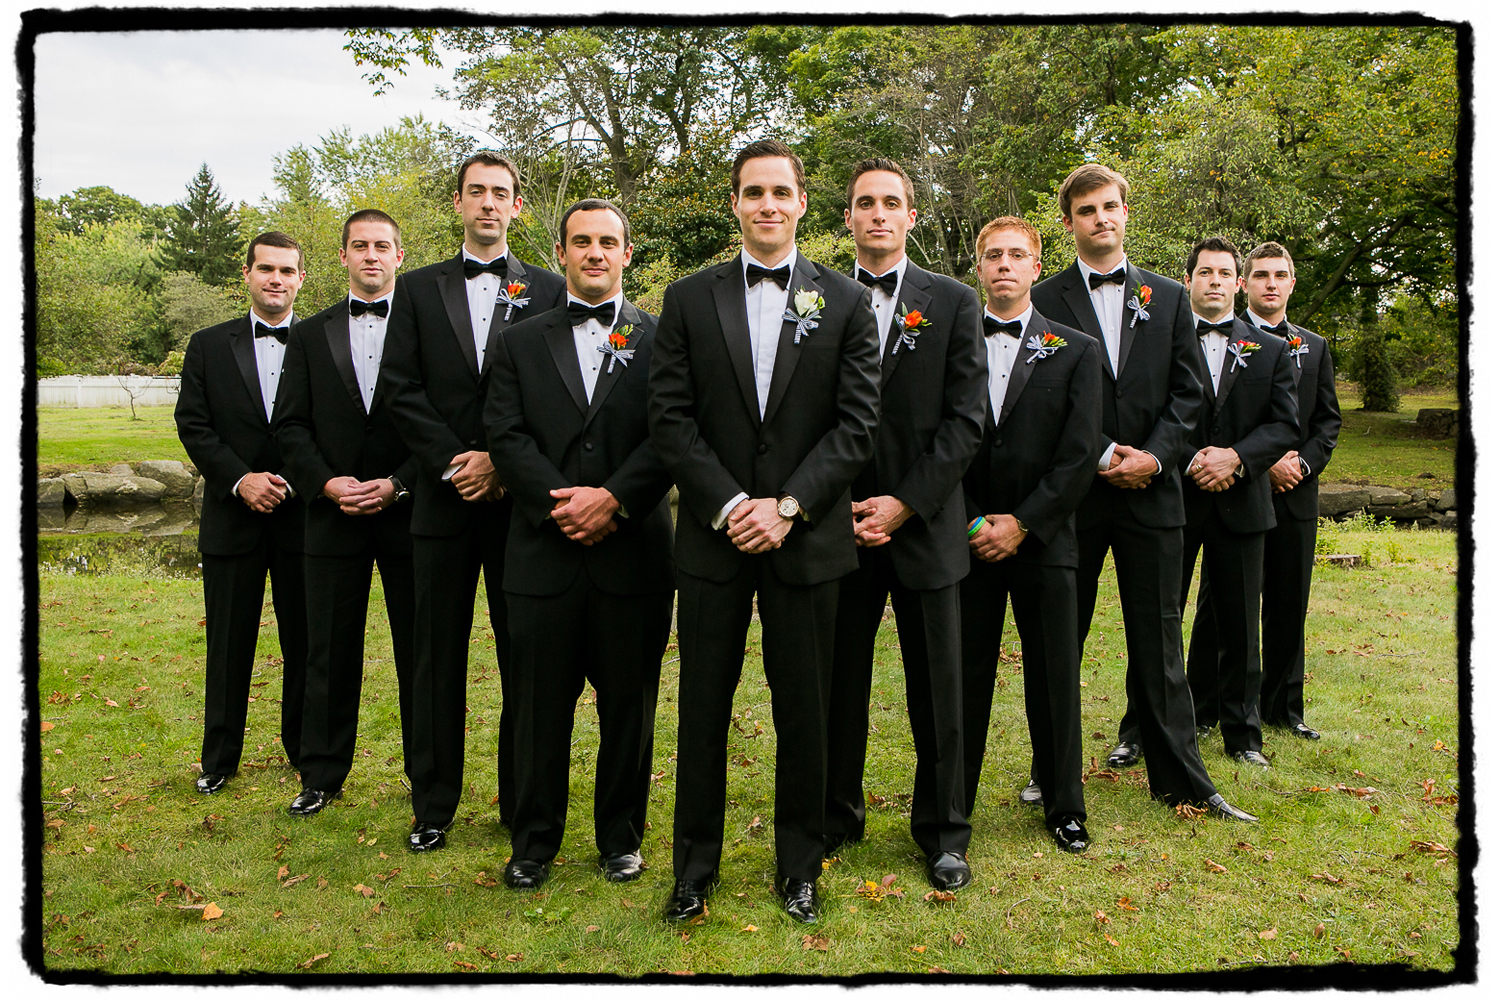 Mike and his groomsmen in black tie at the park in Greenwich, CT.